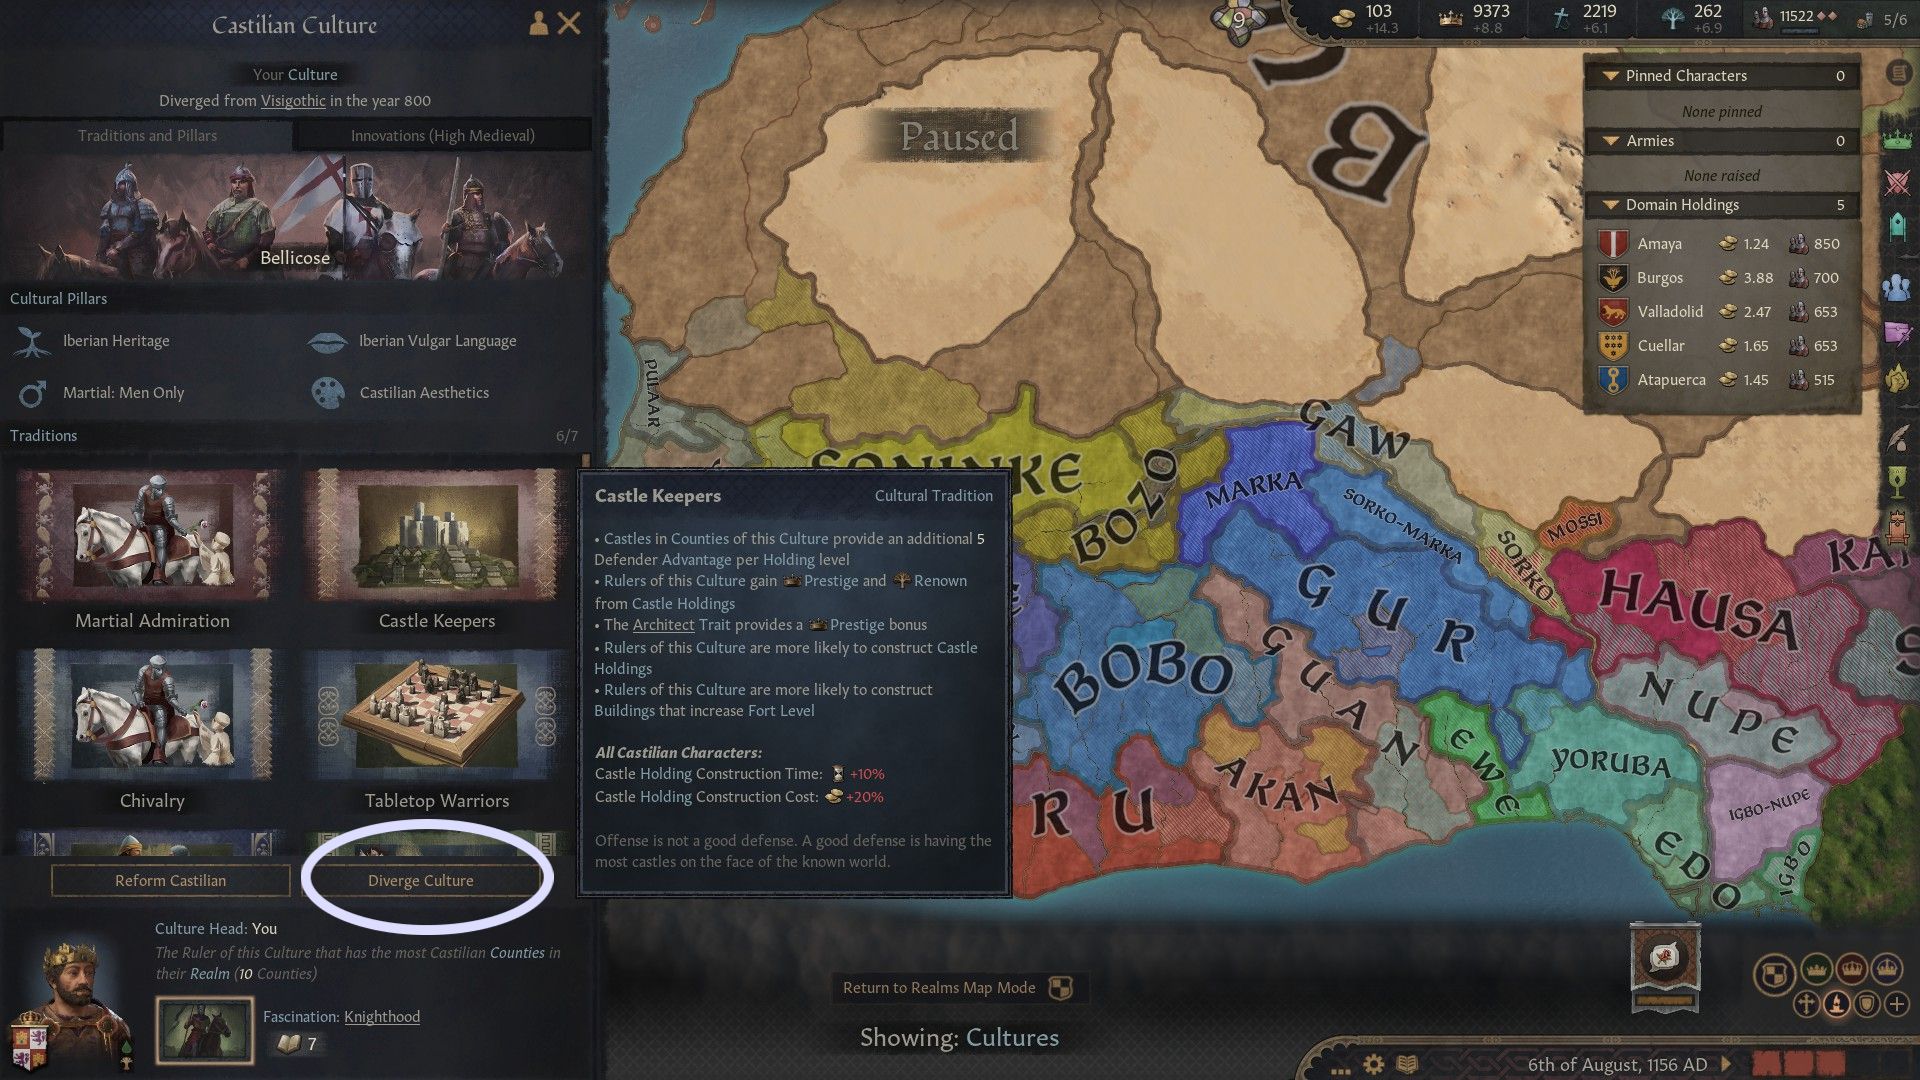 the castilian culture screen in crusader kings 3, with the diverge culture button circled